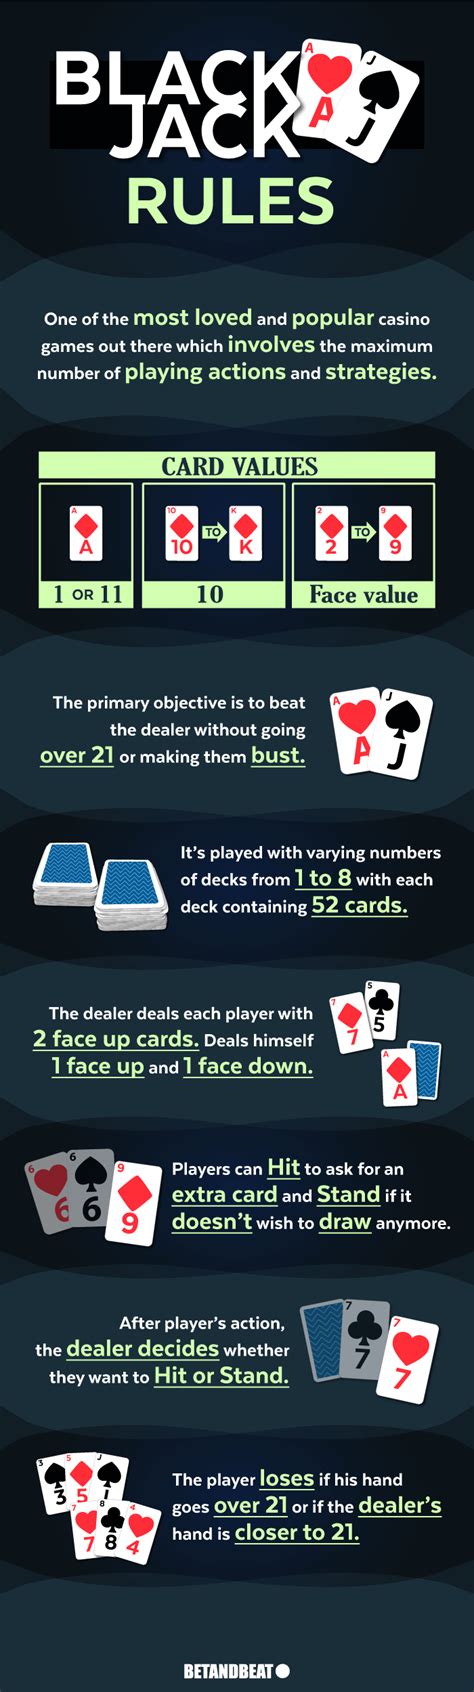 blackjack rules to live by/